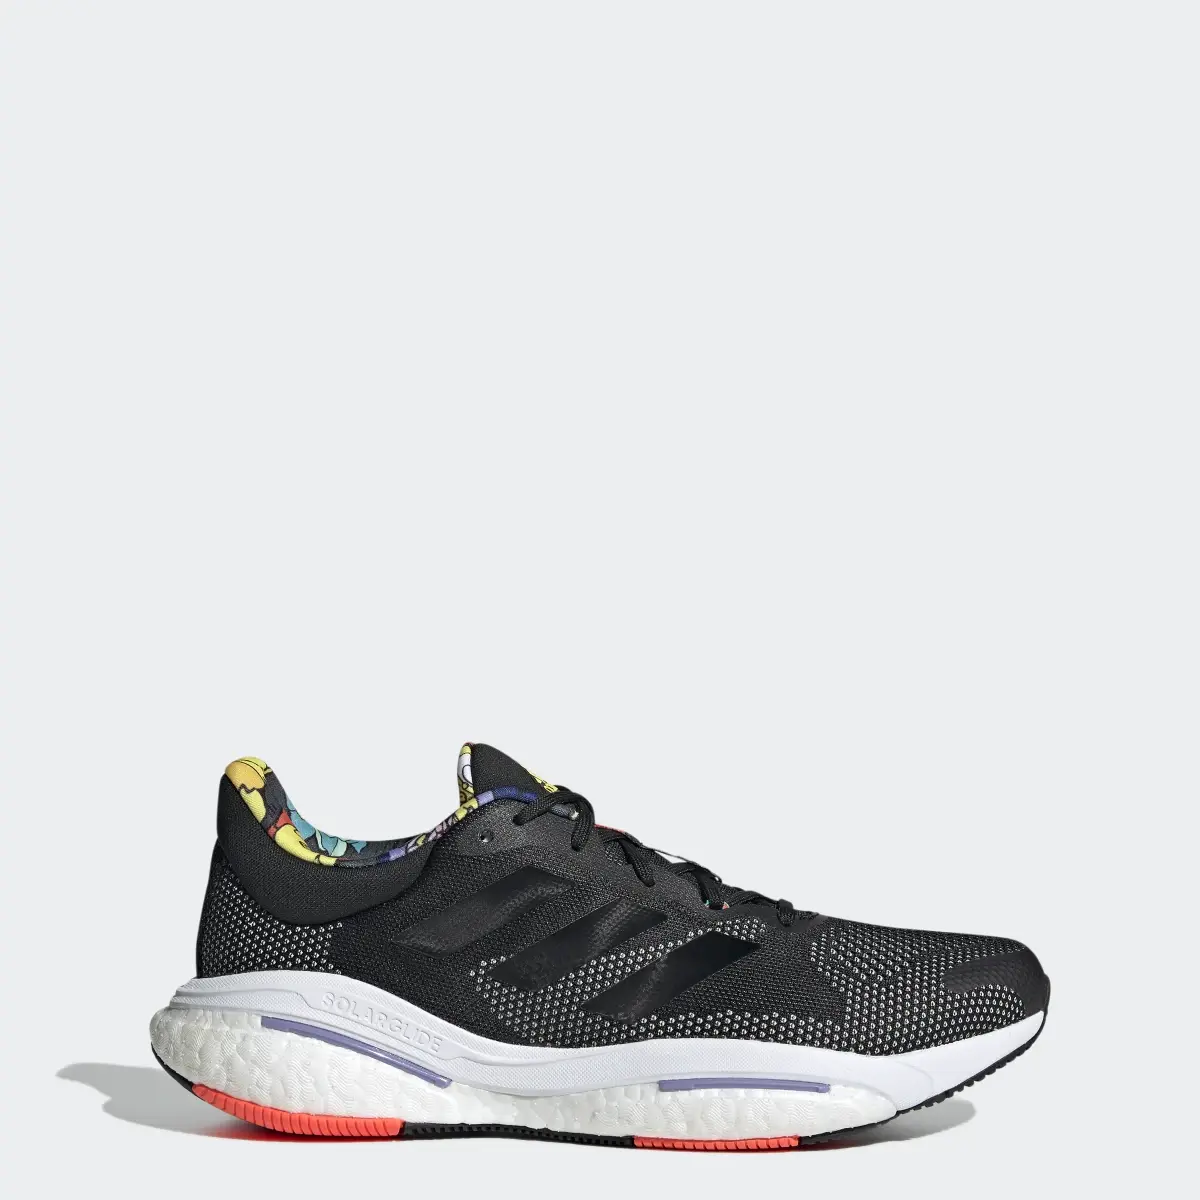 Adidas Solarglide 5 Shoes. 1